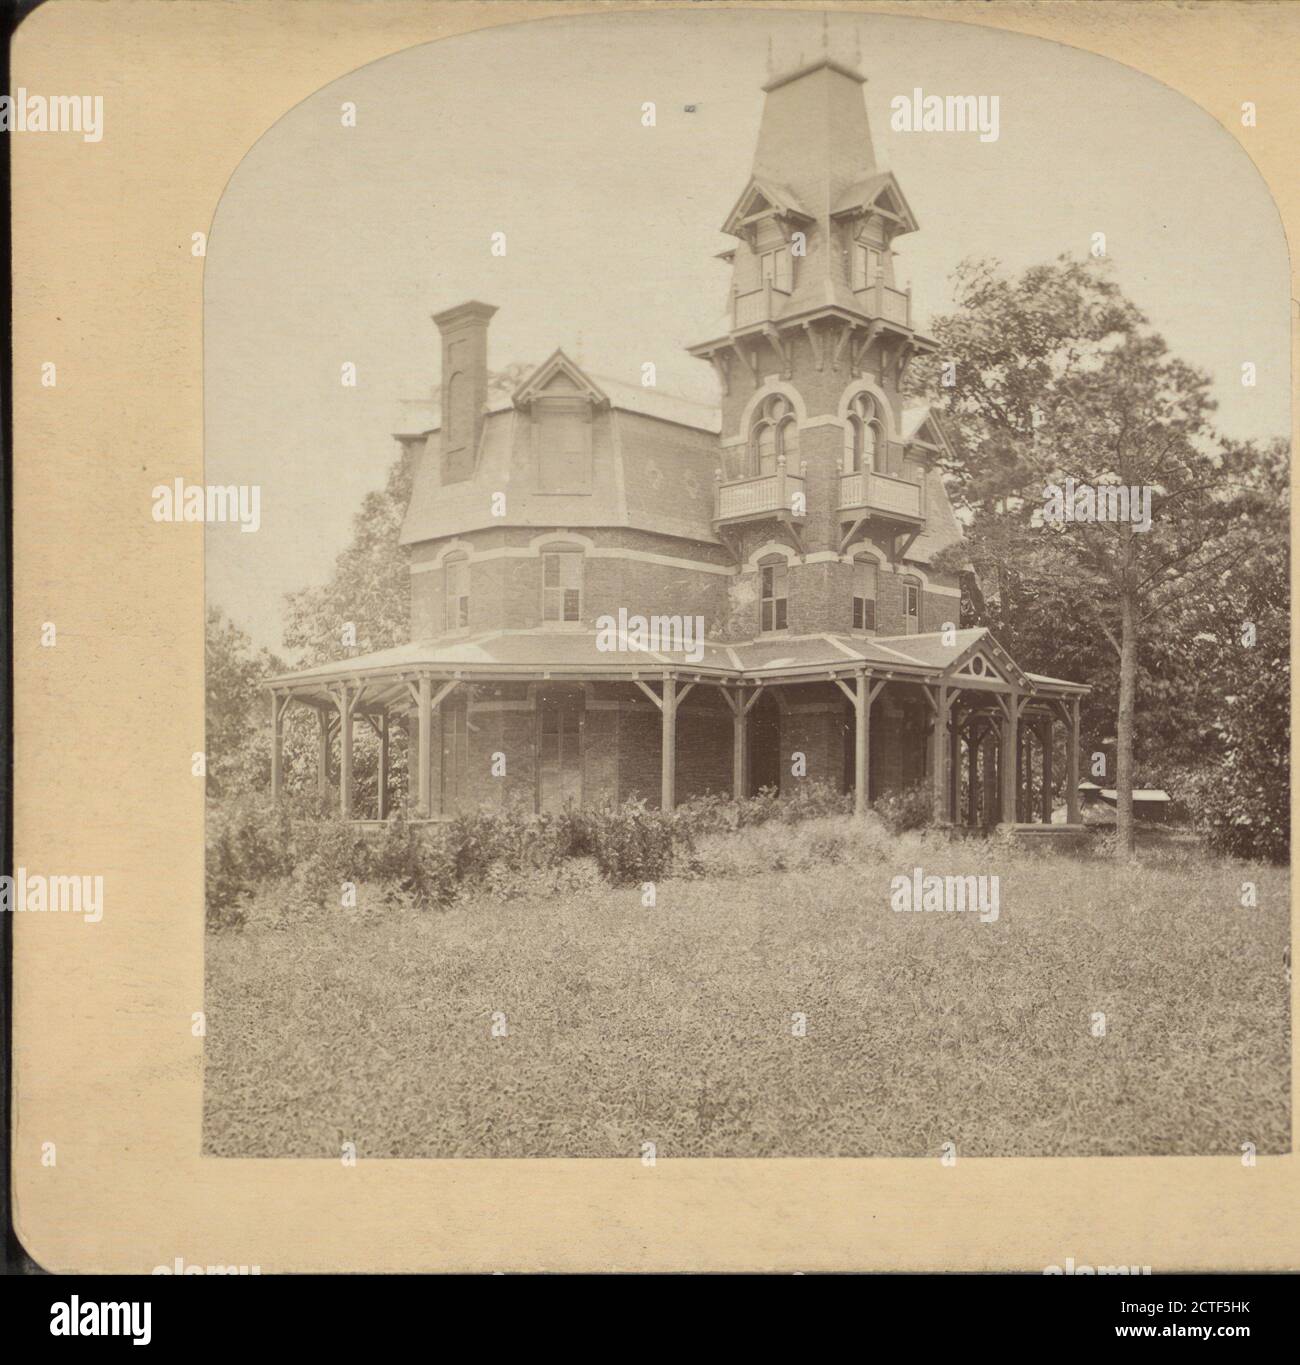 Edwin Booth's Cottage, long Branch, N.J., Littleton View Co., Booth, Edwin, 1833-1893, Tourism, Summer Houses, Homes and Haunts, tourelles (tours), New Jersey, long Branch (N.J.), long Branch Banque D'Images